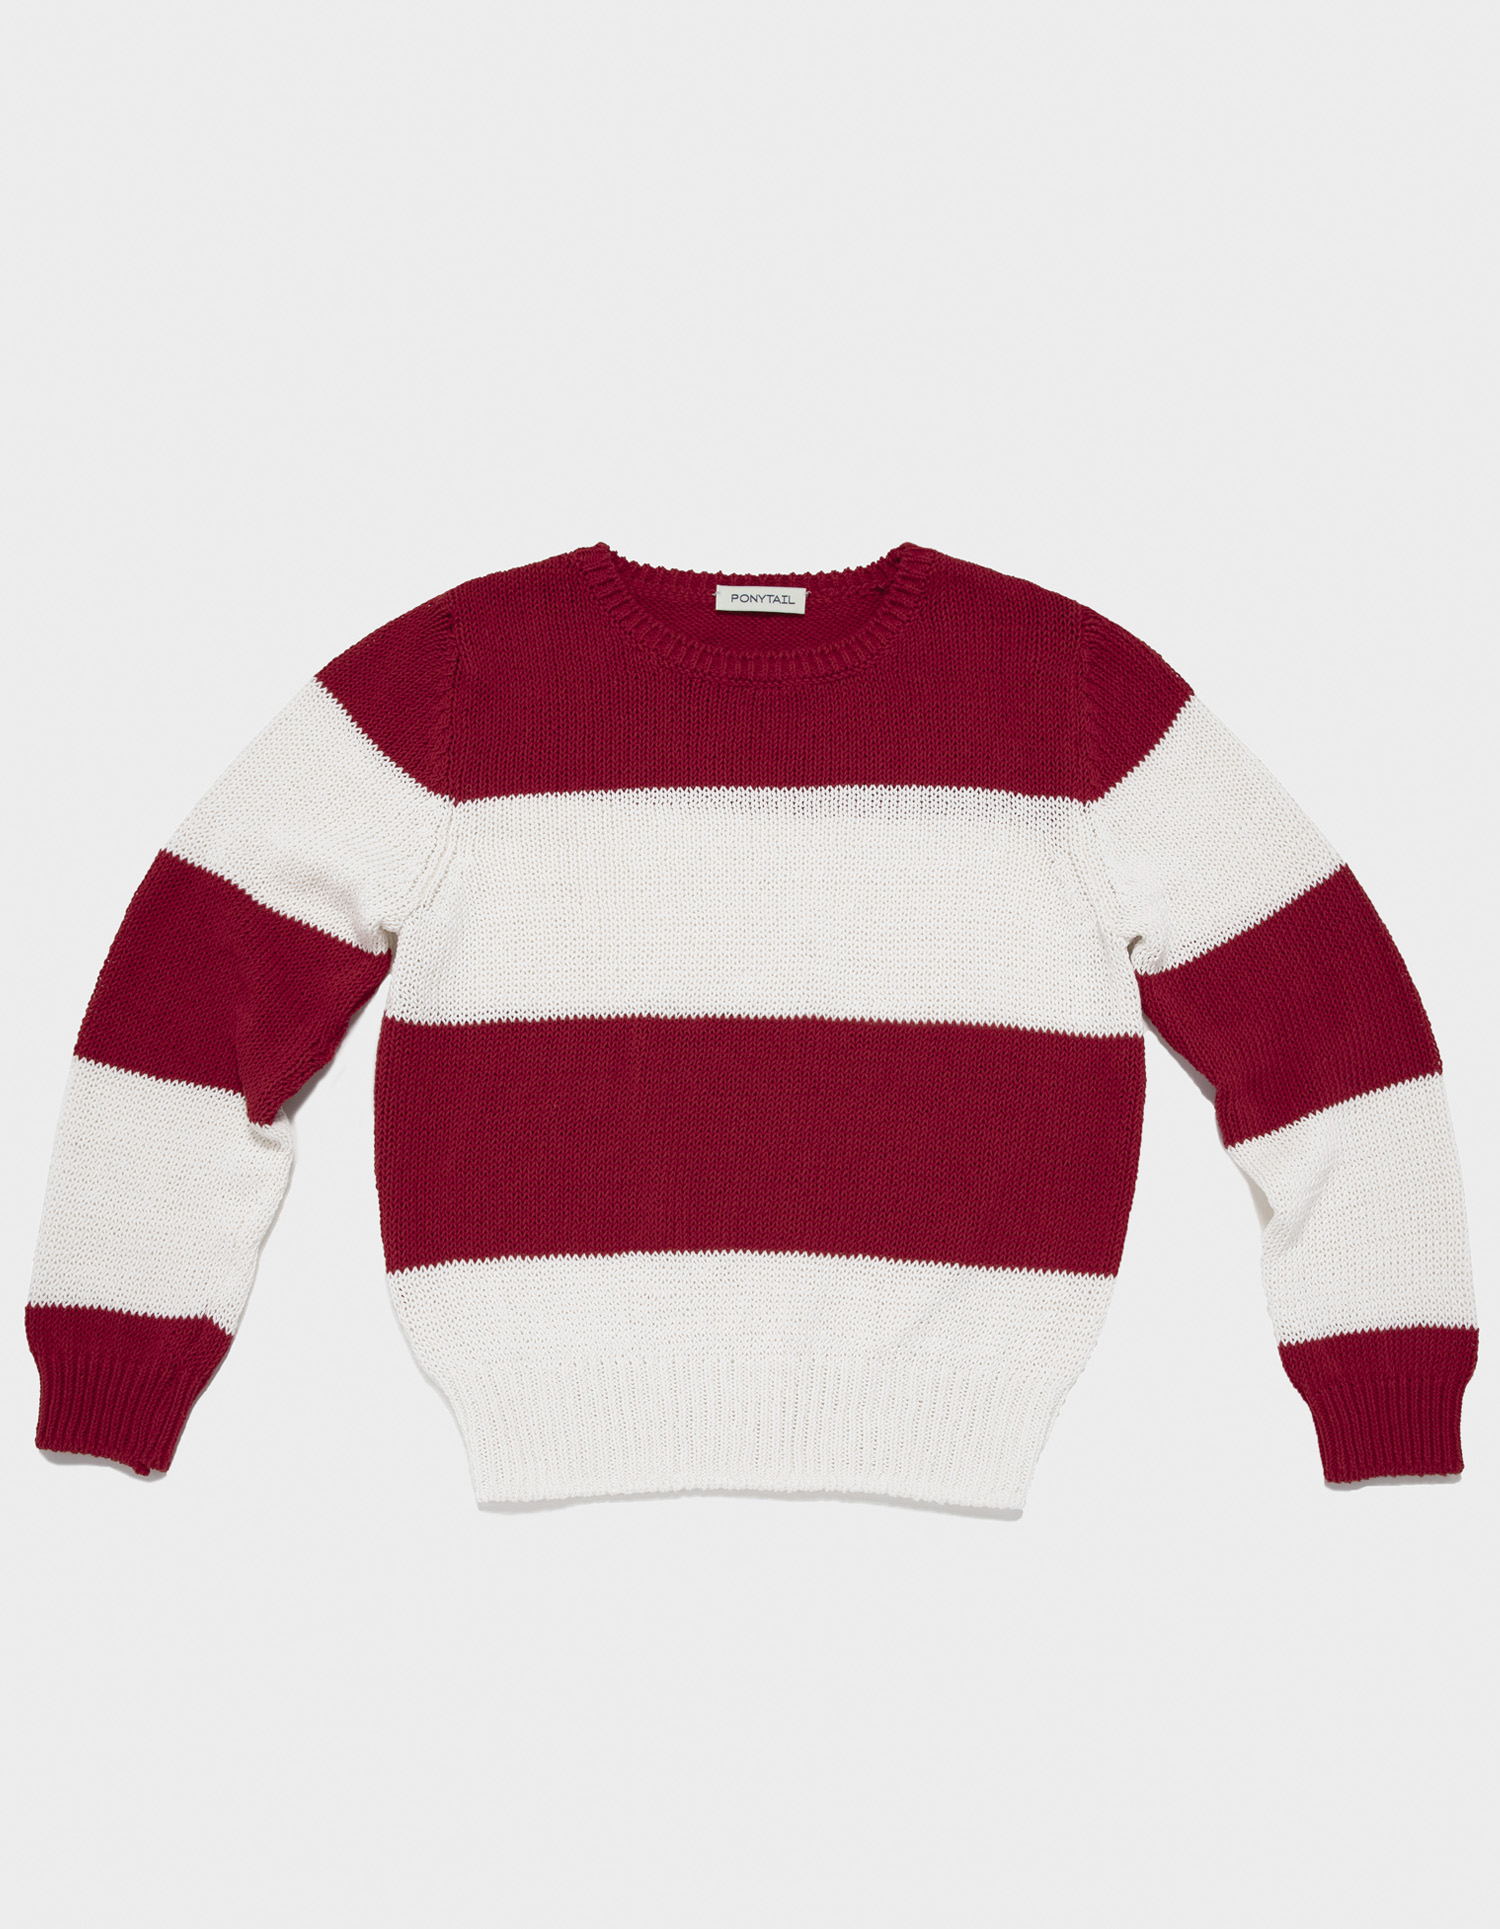 BE KIND Striped Knit (RED) - 포니테일